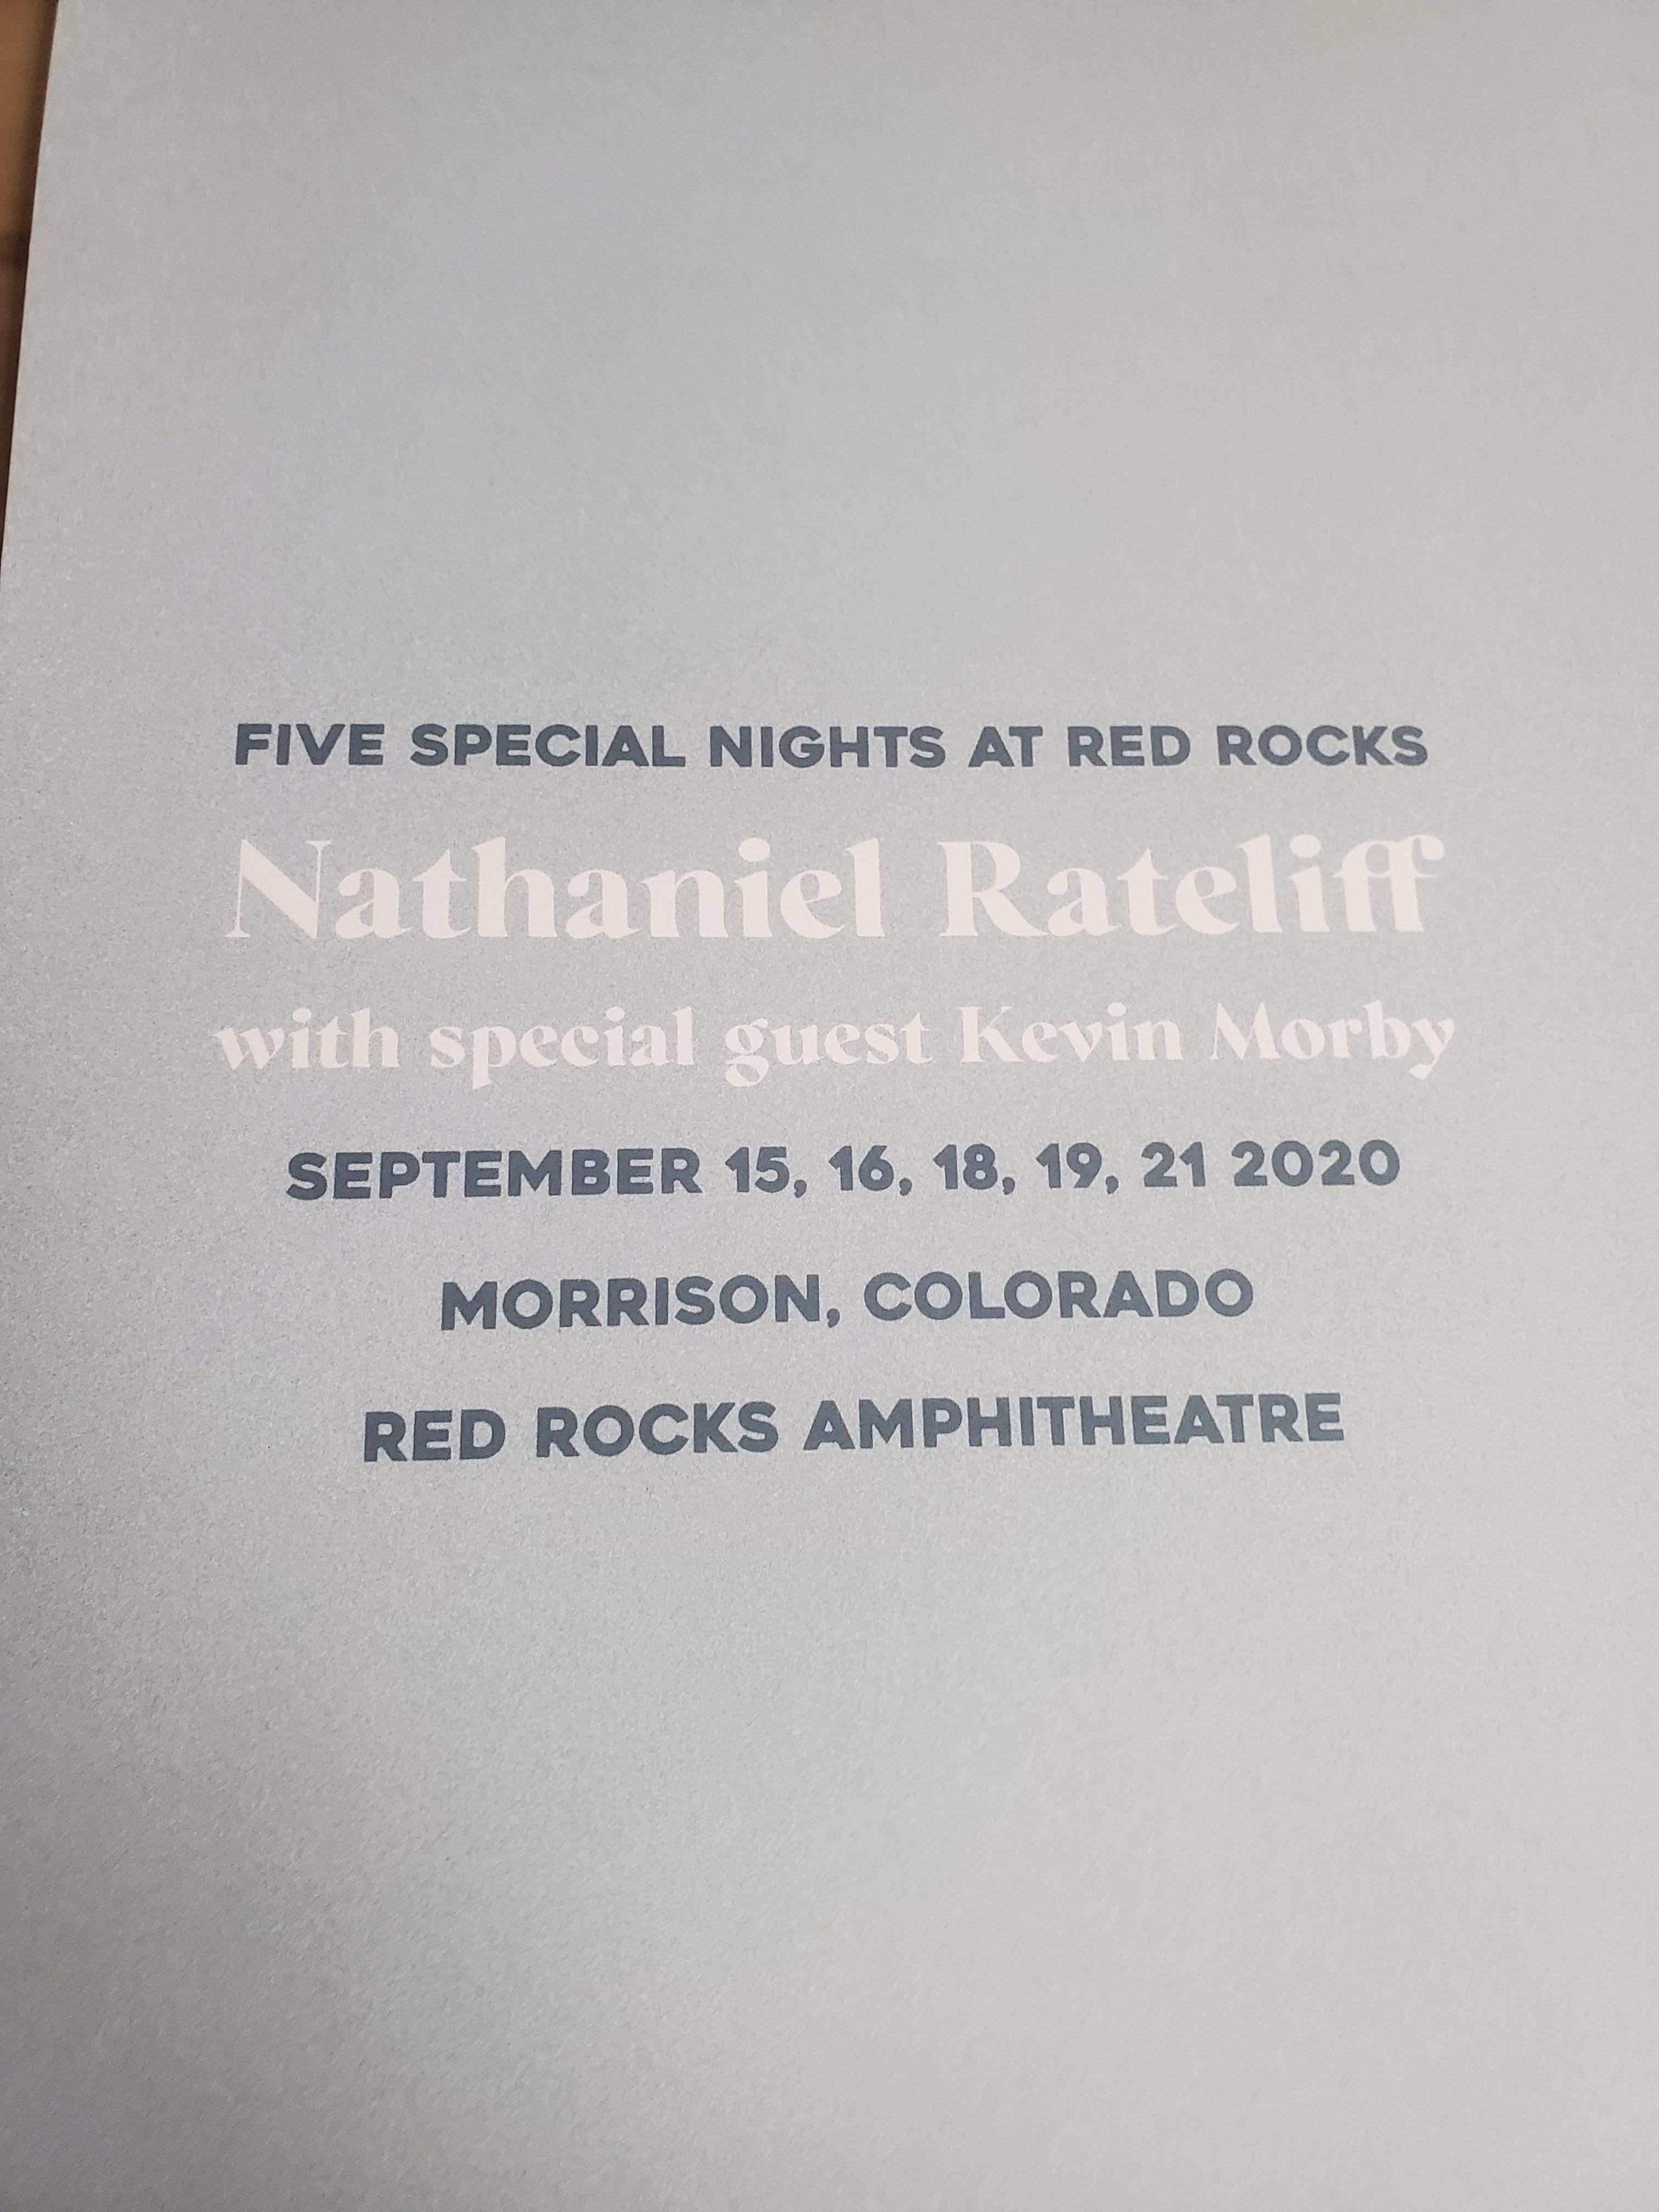 Title:  Nathaniel Rateliff - Five Special Nights at Red Rocks (2020)  Artist:  Nate Meese  Type: Screen print poster  Size: 24" x 18"  Venue:  Red Rocks Amphitheatre  Location:  Morrison, CO  Notes:  Print is stored flat in very good condition. Following purchase, prints are rolled in archival paper and shipped with bubble wrap in sturdy cardboard tubes.  Check out our other listings for more hard-to-find and out-of-print posters.